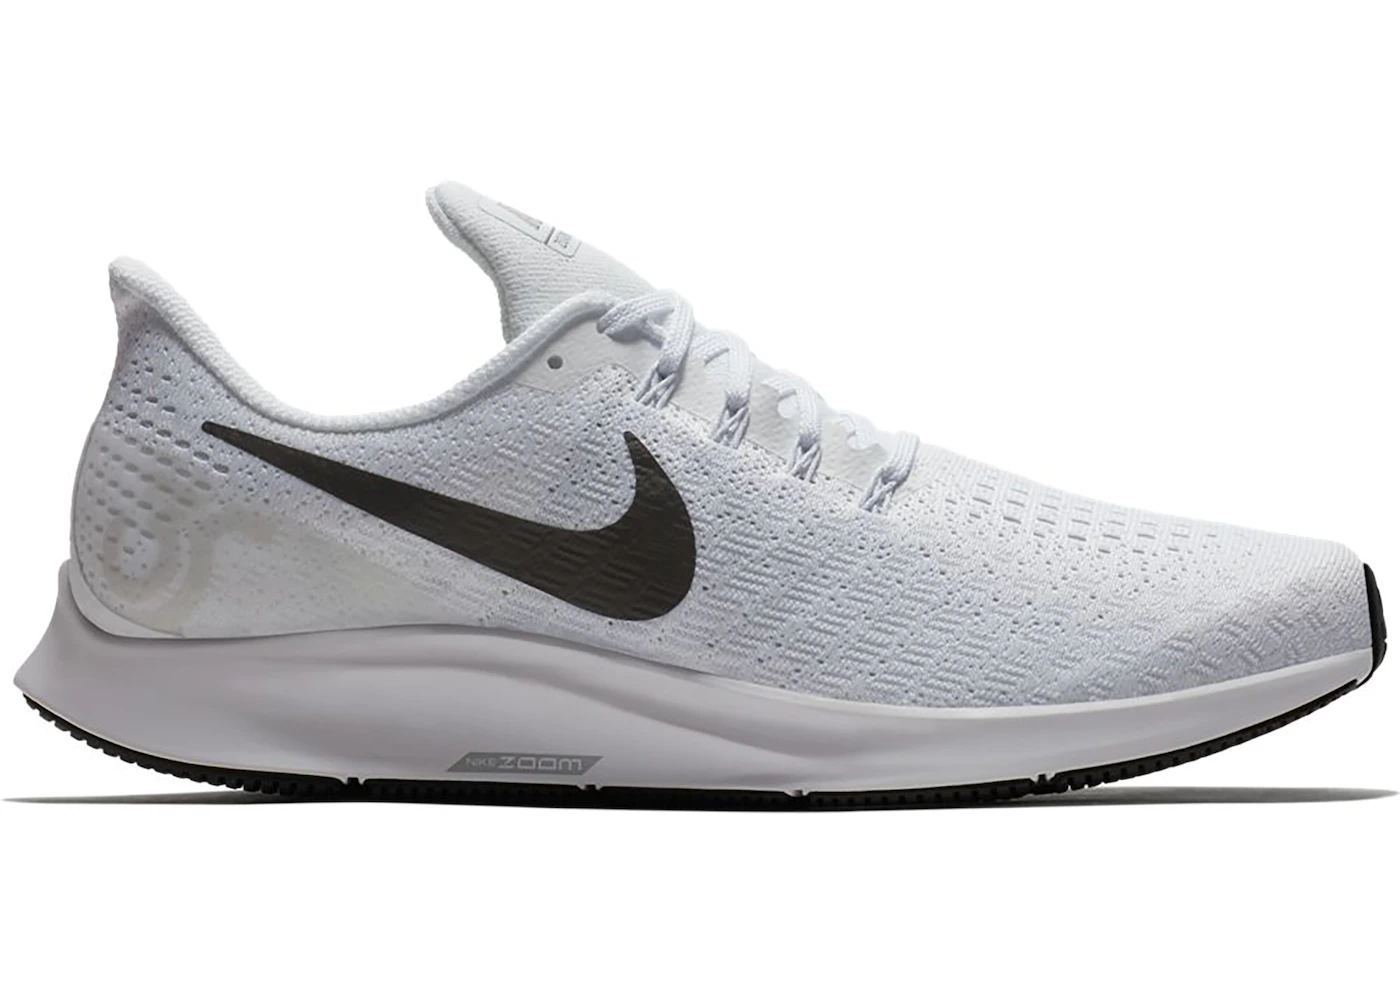 water the flower Anyways By-product Nike Air Zoom Pegasus 35 White Black - AO3905-100 - US